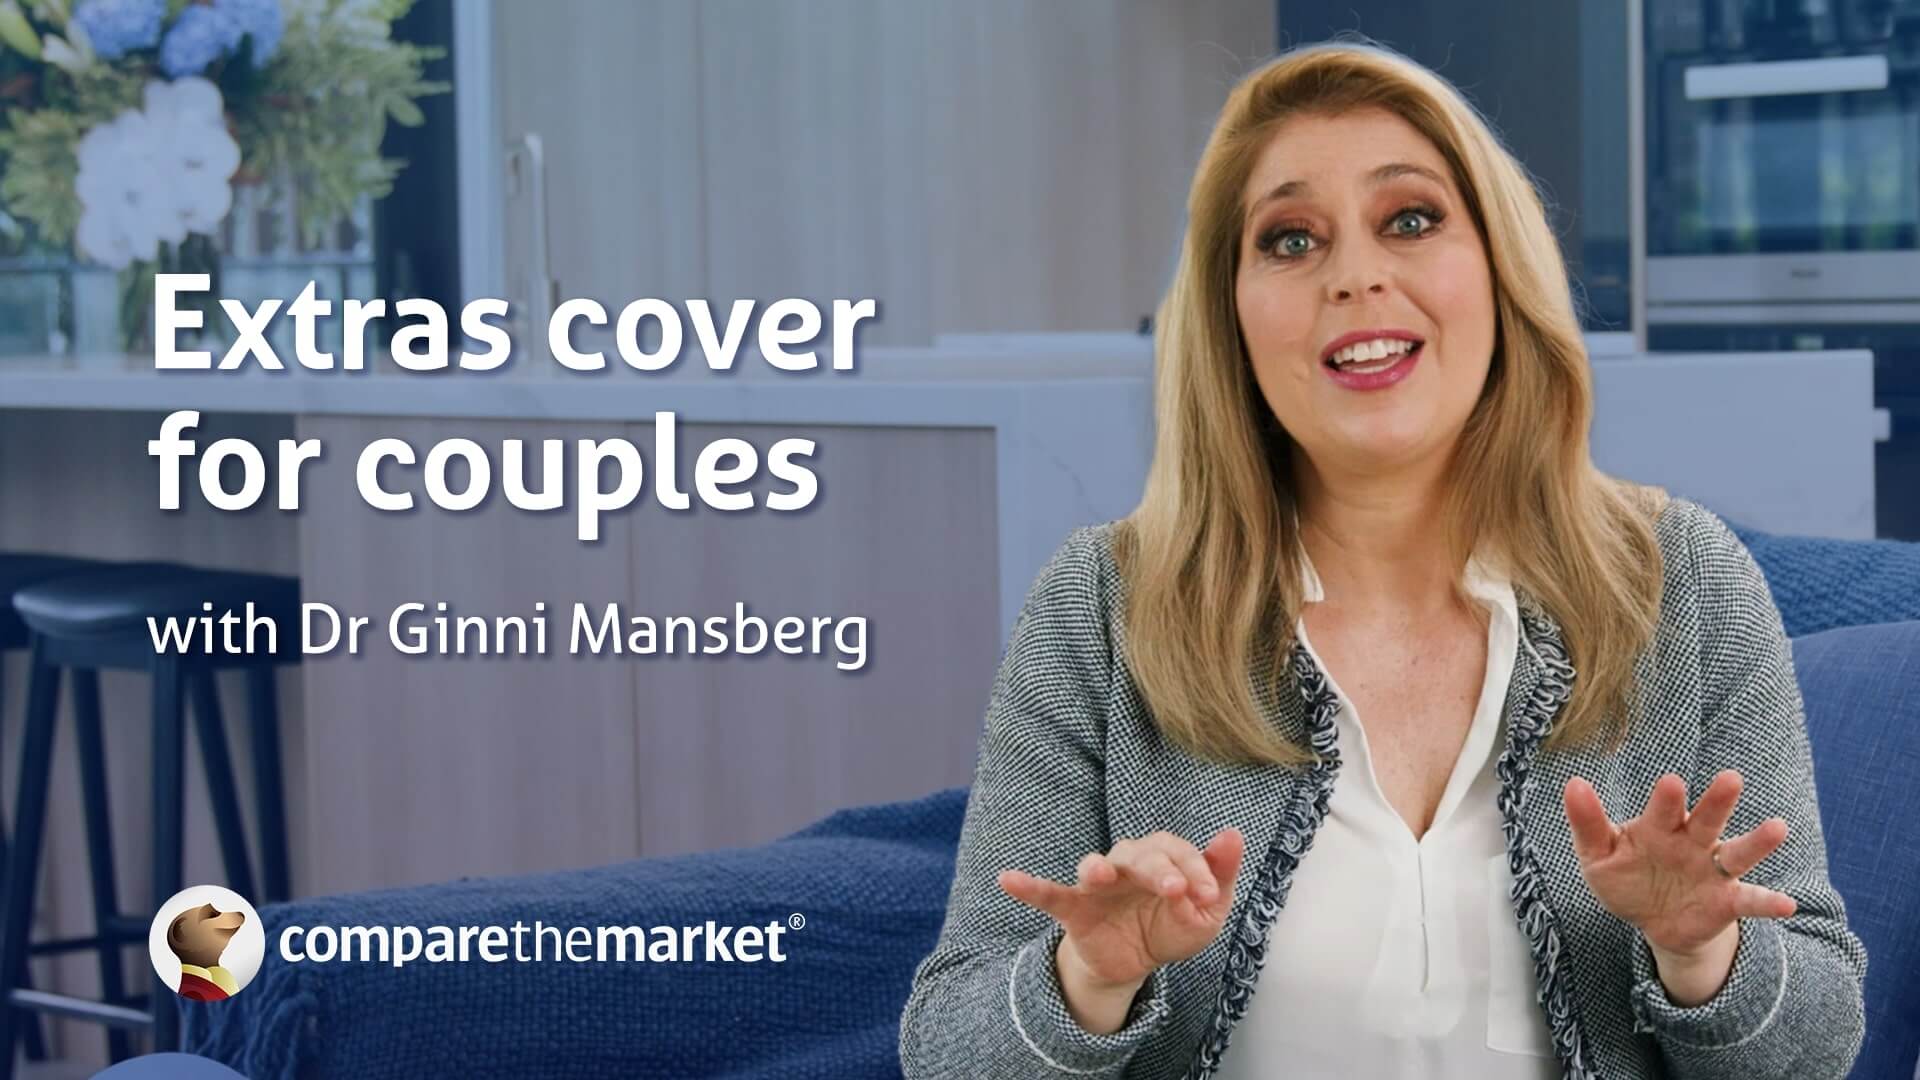 Couples health insurance, Simples!